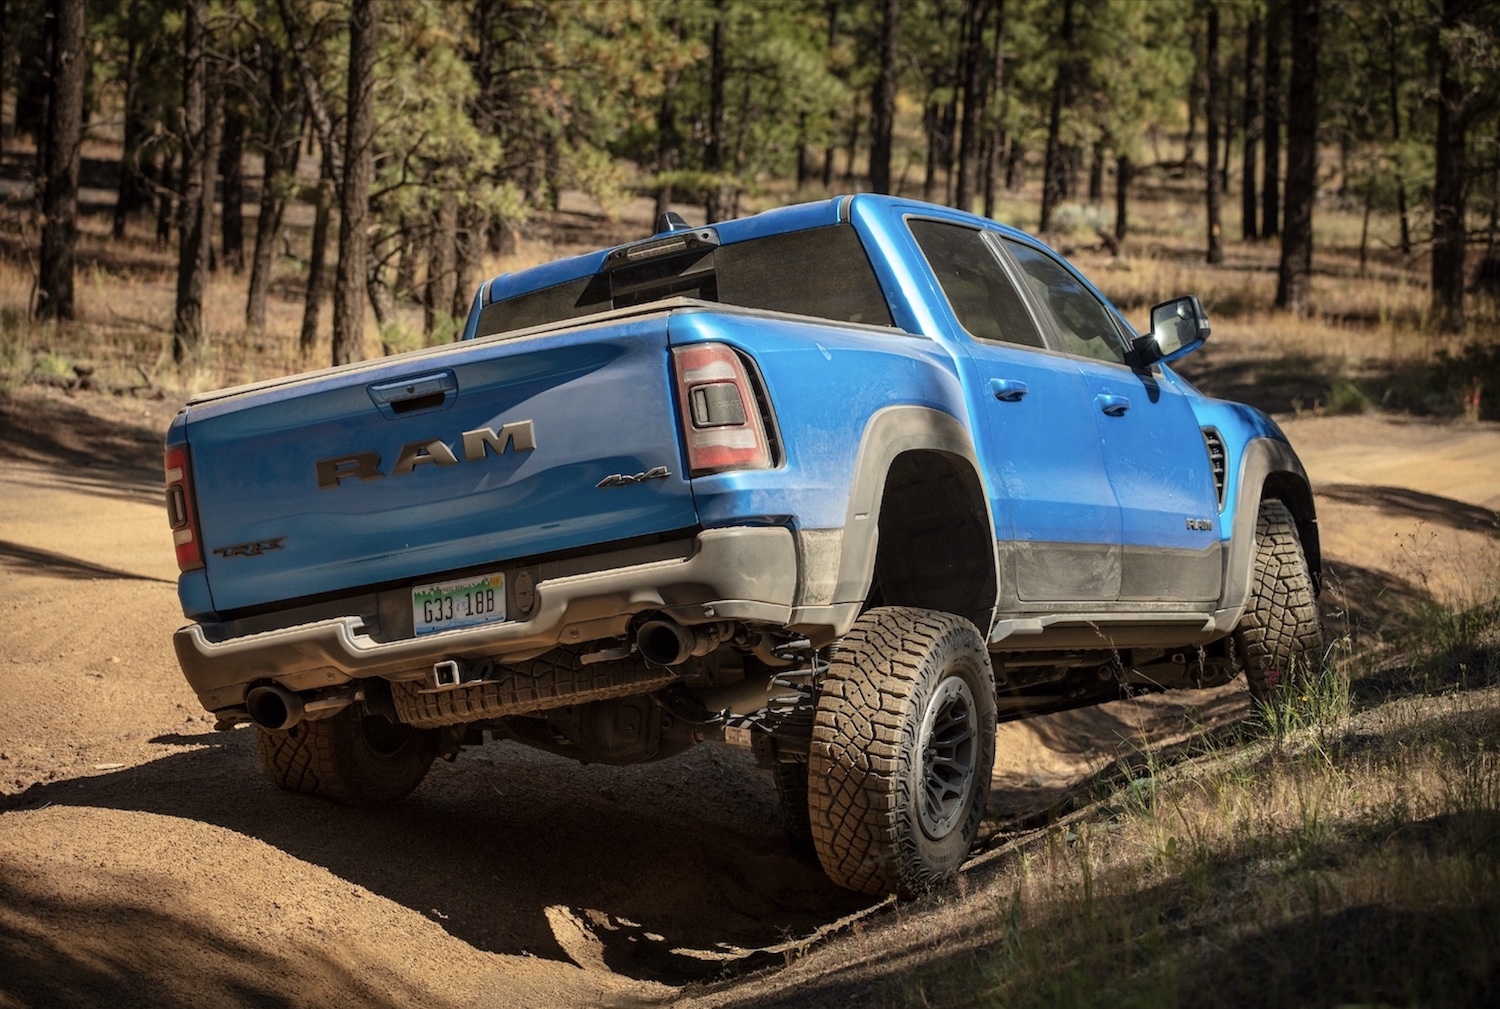 A blue Ram 1500 TRX parked on a dirt road, trees visible in the background.